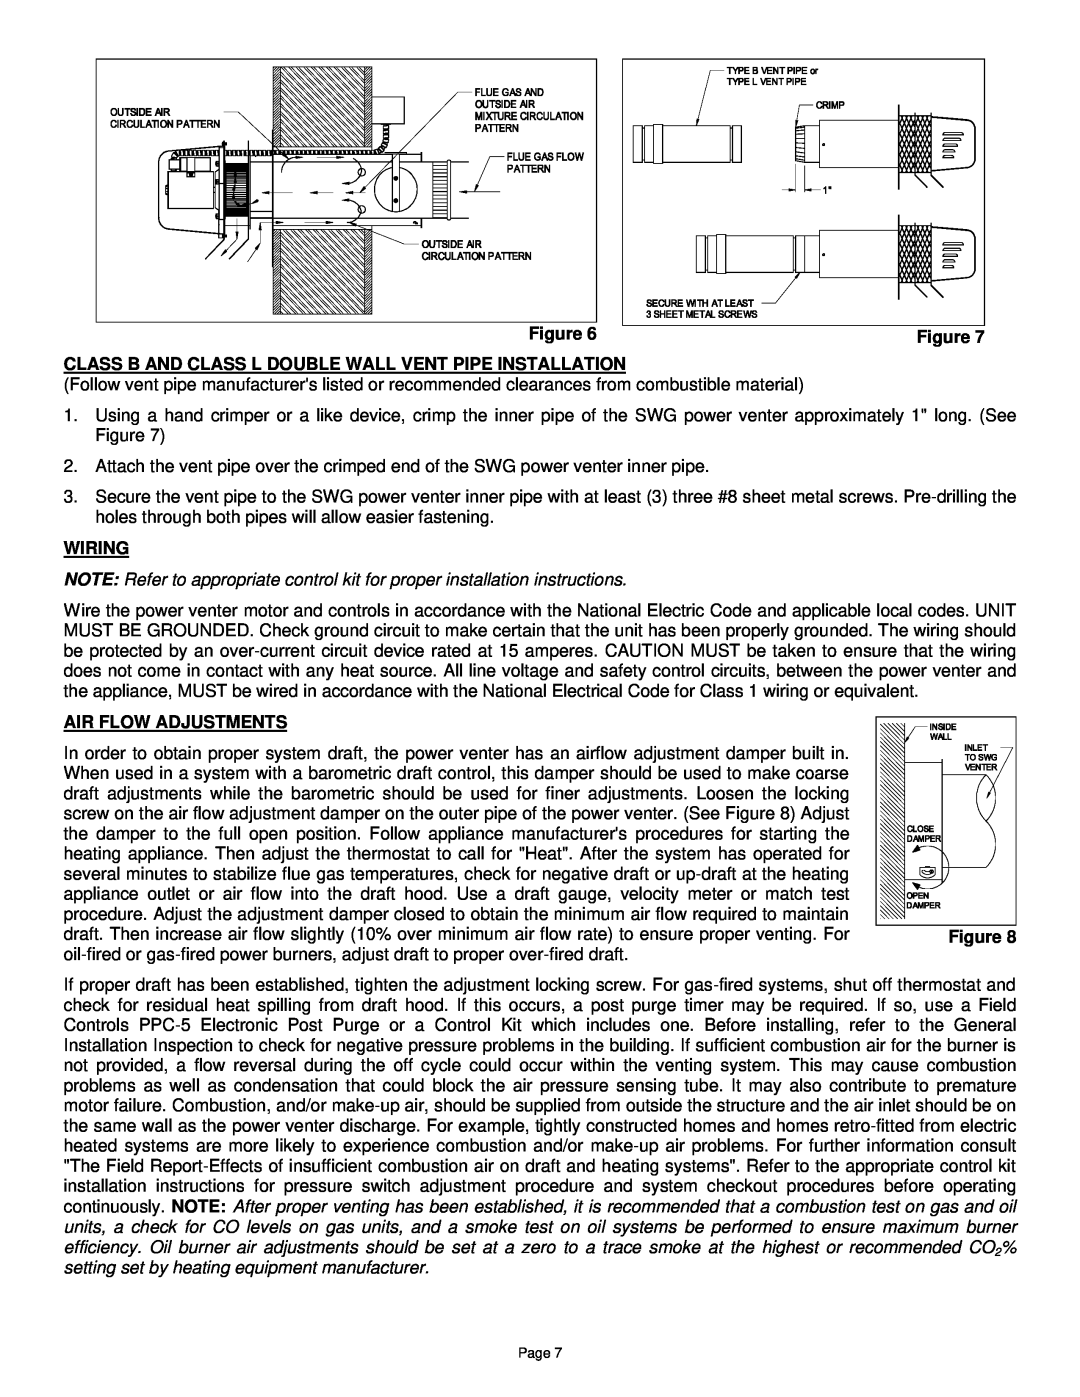 Field Controls SWG Stainless, SWGII installation instructions Wiring, Air Flow Adjustments 